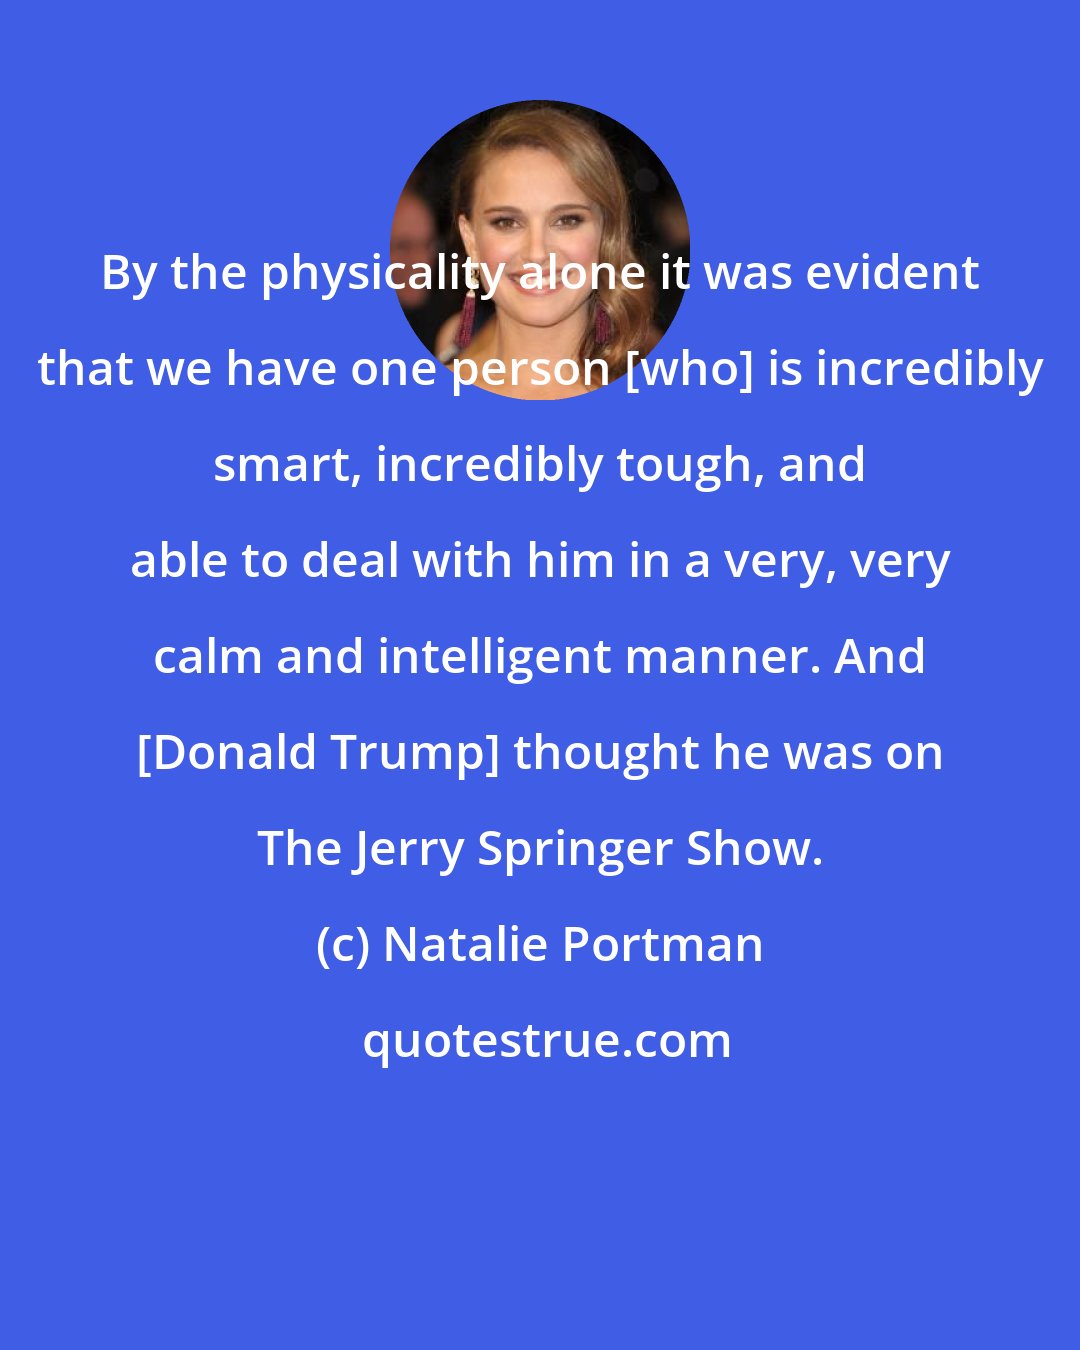 Natalie Portman: By the physicality alone it was evident that we have one person [who] is incredibly smart, incredibly tough, and able to deal with him in a very, very calm and intelligent manner. And [Donald Trump] thought he was on The Jerry Springer Show.